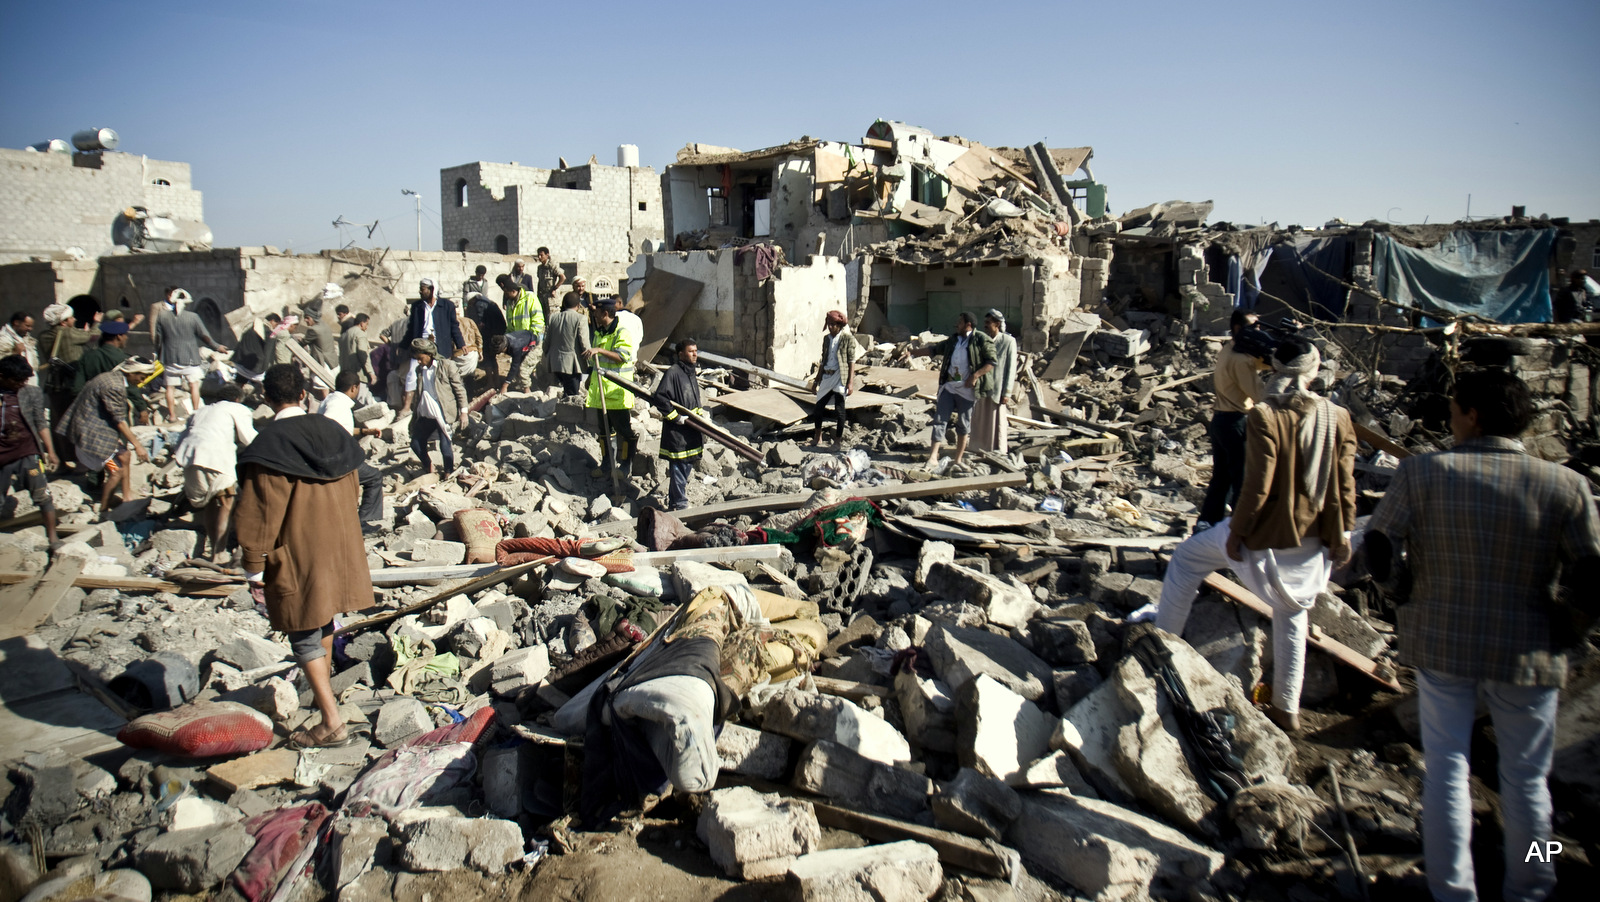 People search for survivors under the rubble of houses destroyed by Saudi airstrikes near Sanaa Airport, Yemen, Thursday, March 26, 2015. Saudi Arabia launched airstrikes Thursday targeting military installations in Yemen held by Shiite rebels who were taking over a key port city in the country's south and had driven the embattled president to flee by sea, security officials said.